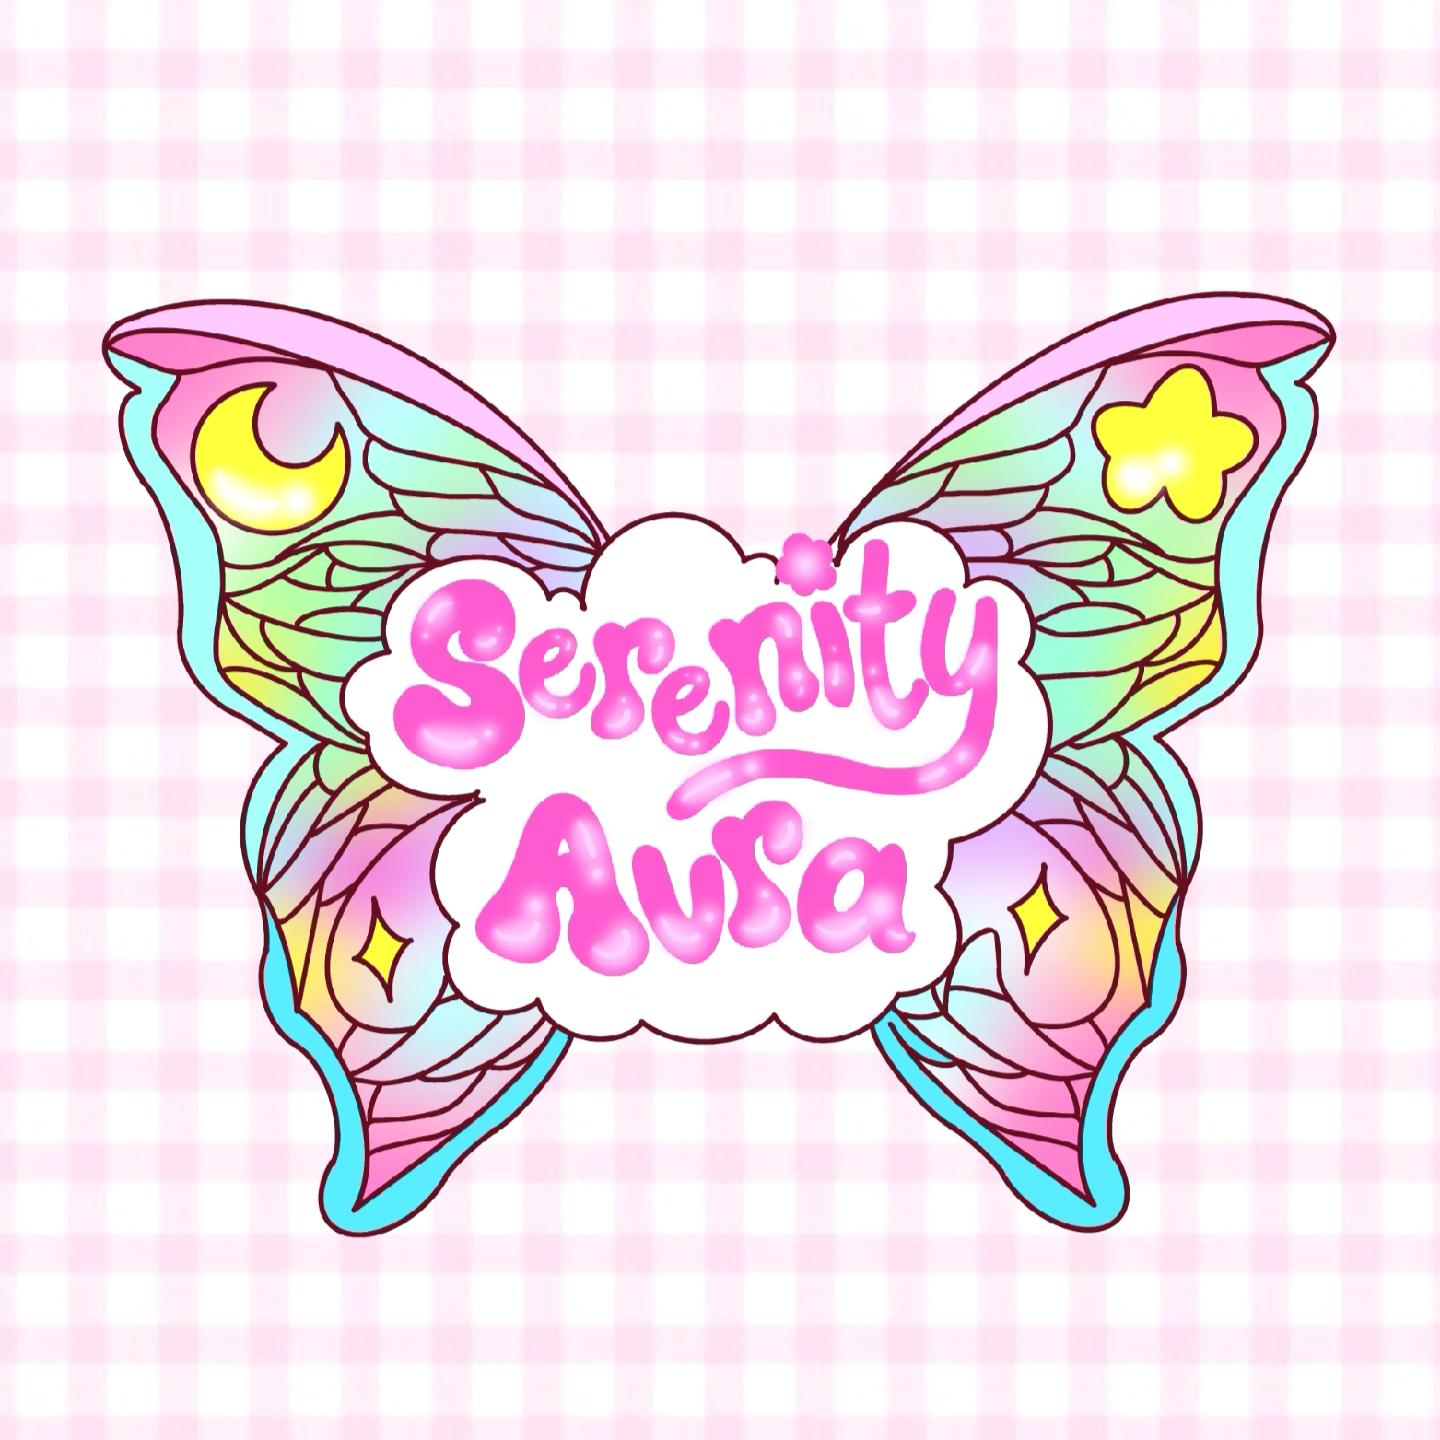 Serenity Aura🌈's images